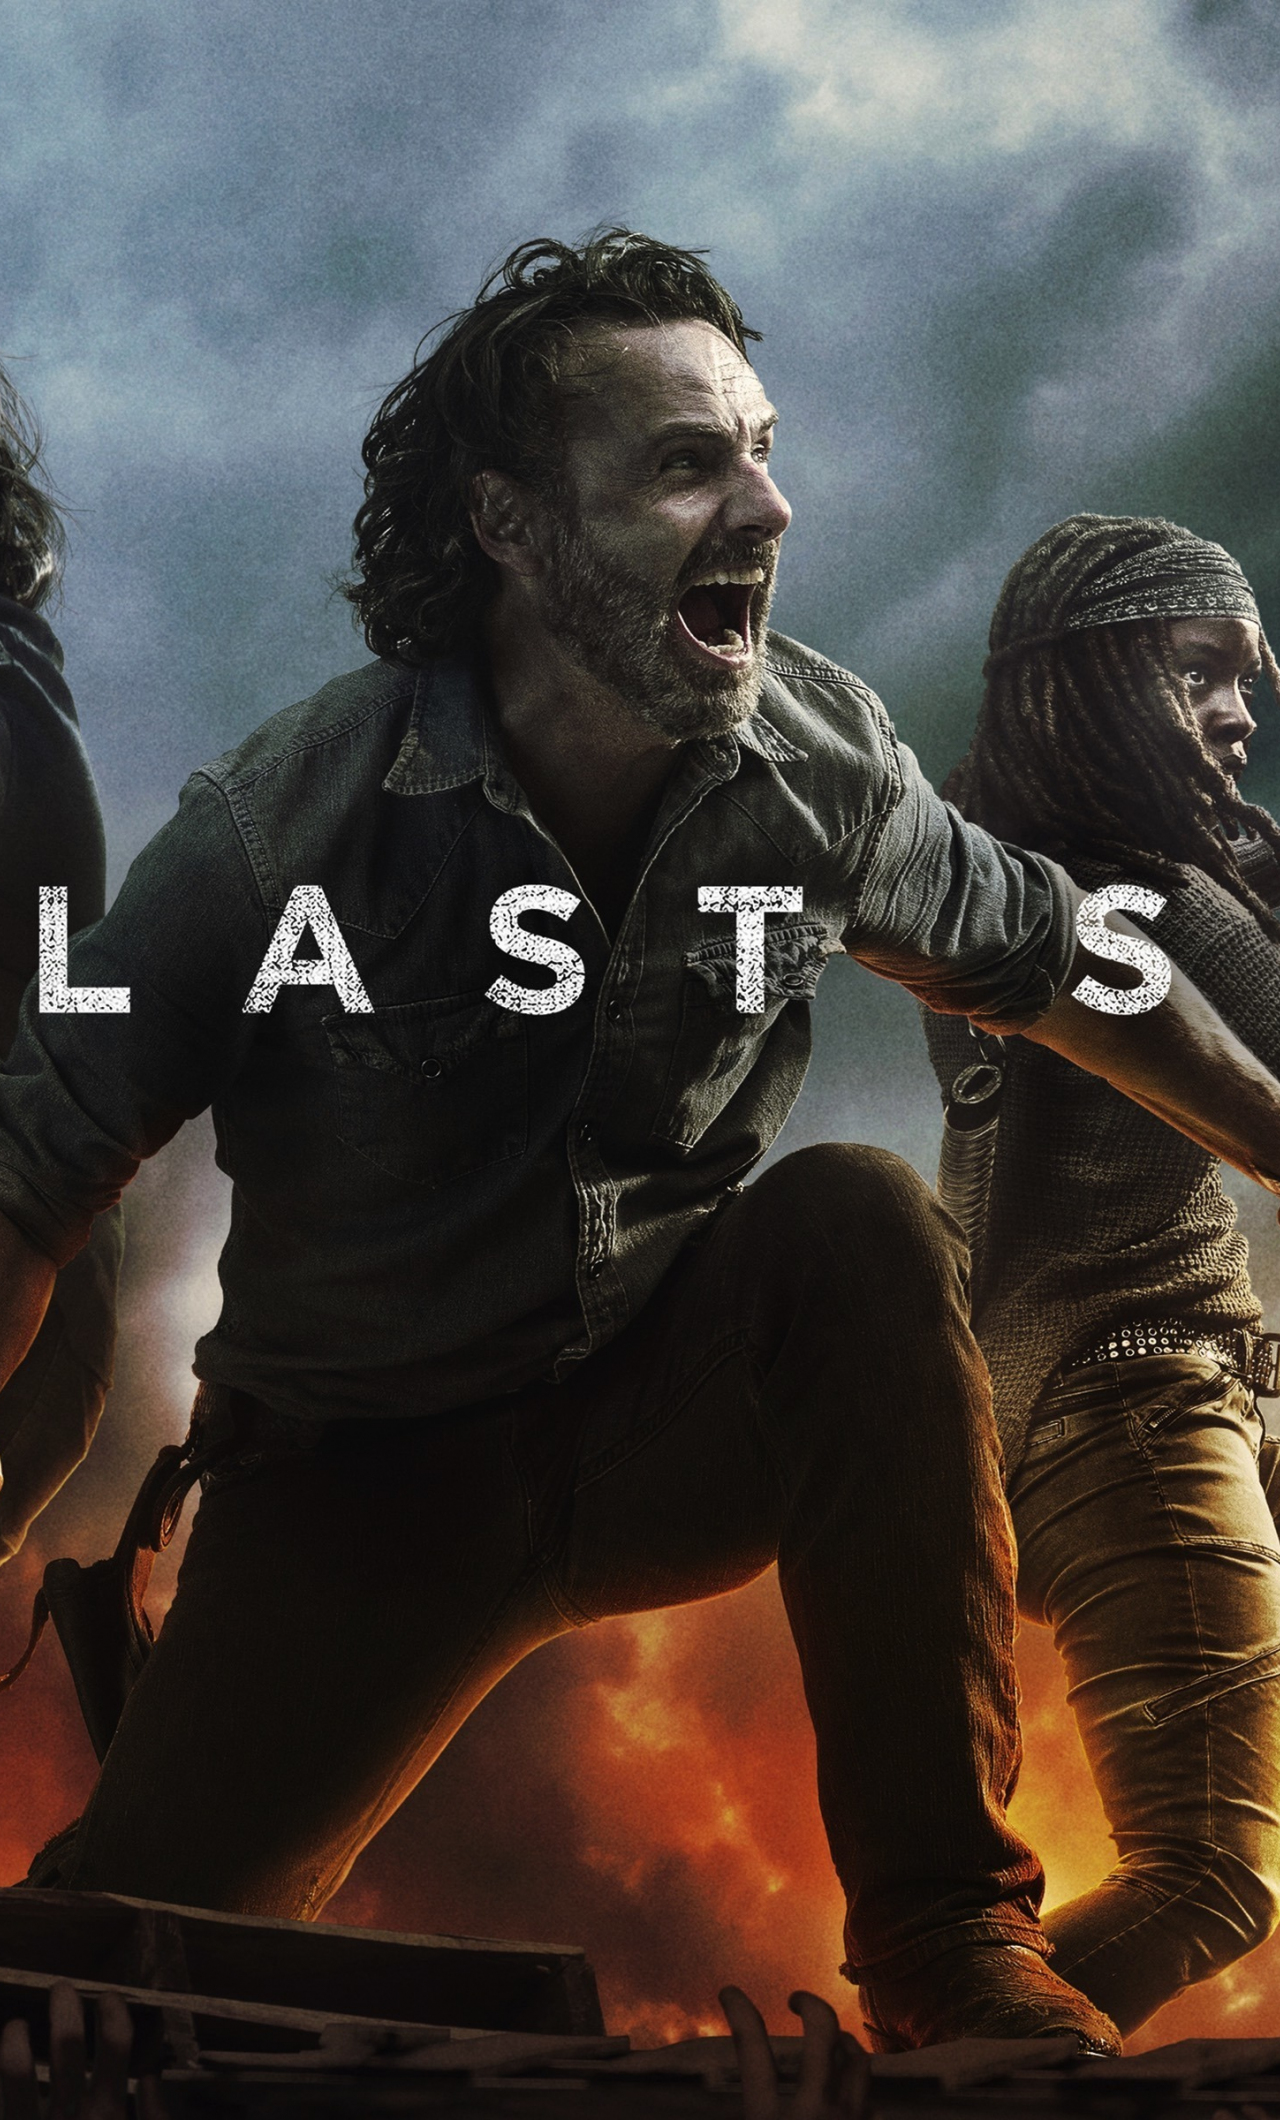 Download 1280x21 Wallpaper The Walking Dead The Last Stand Tv Show 18 Iphone 6 Plus 1280x21 Hd Image Background 3529